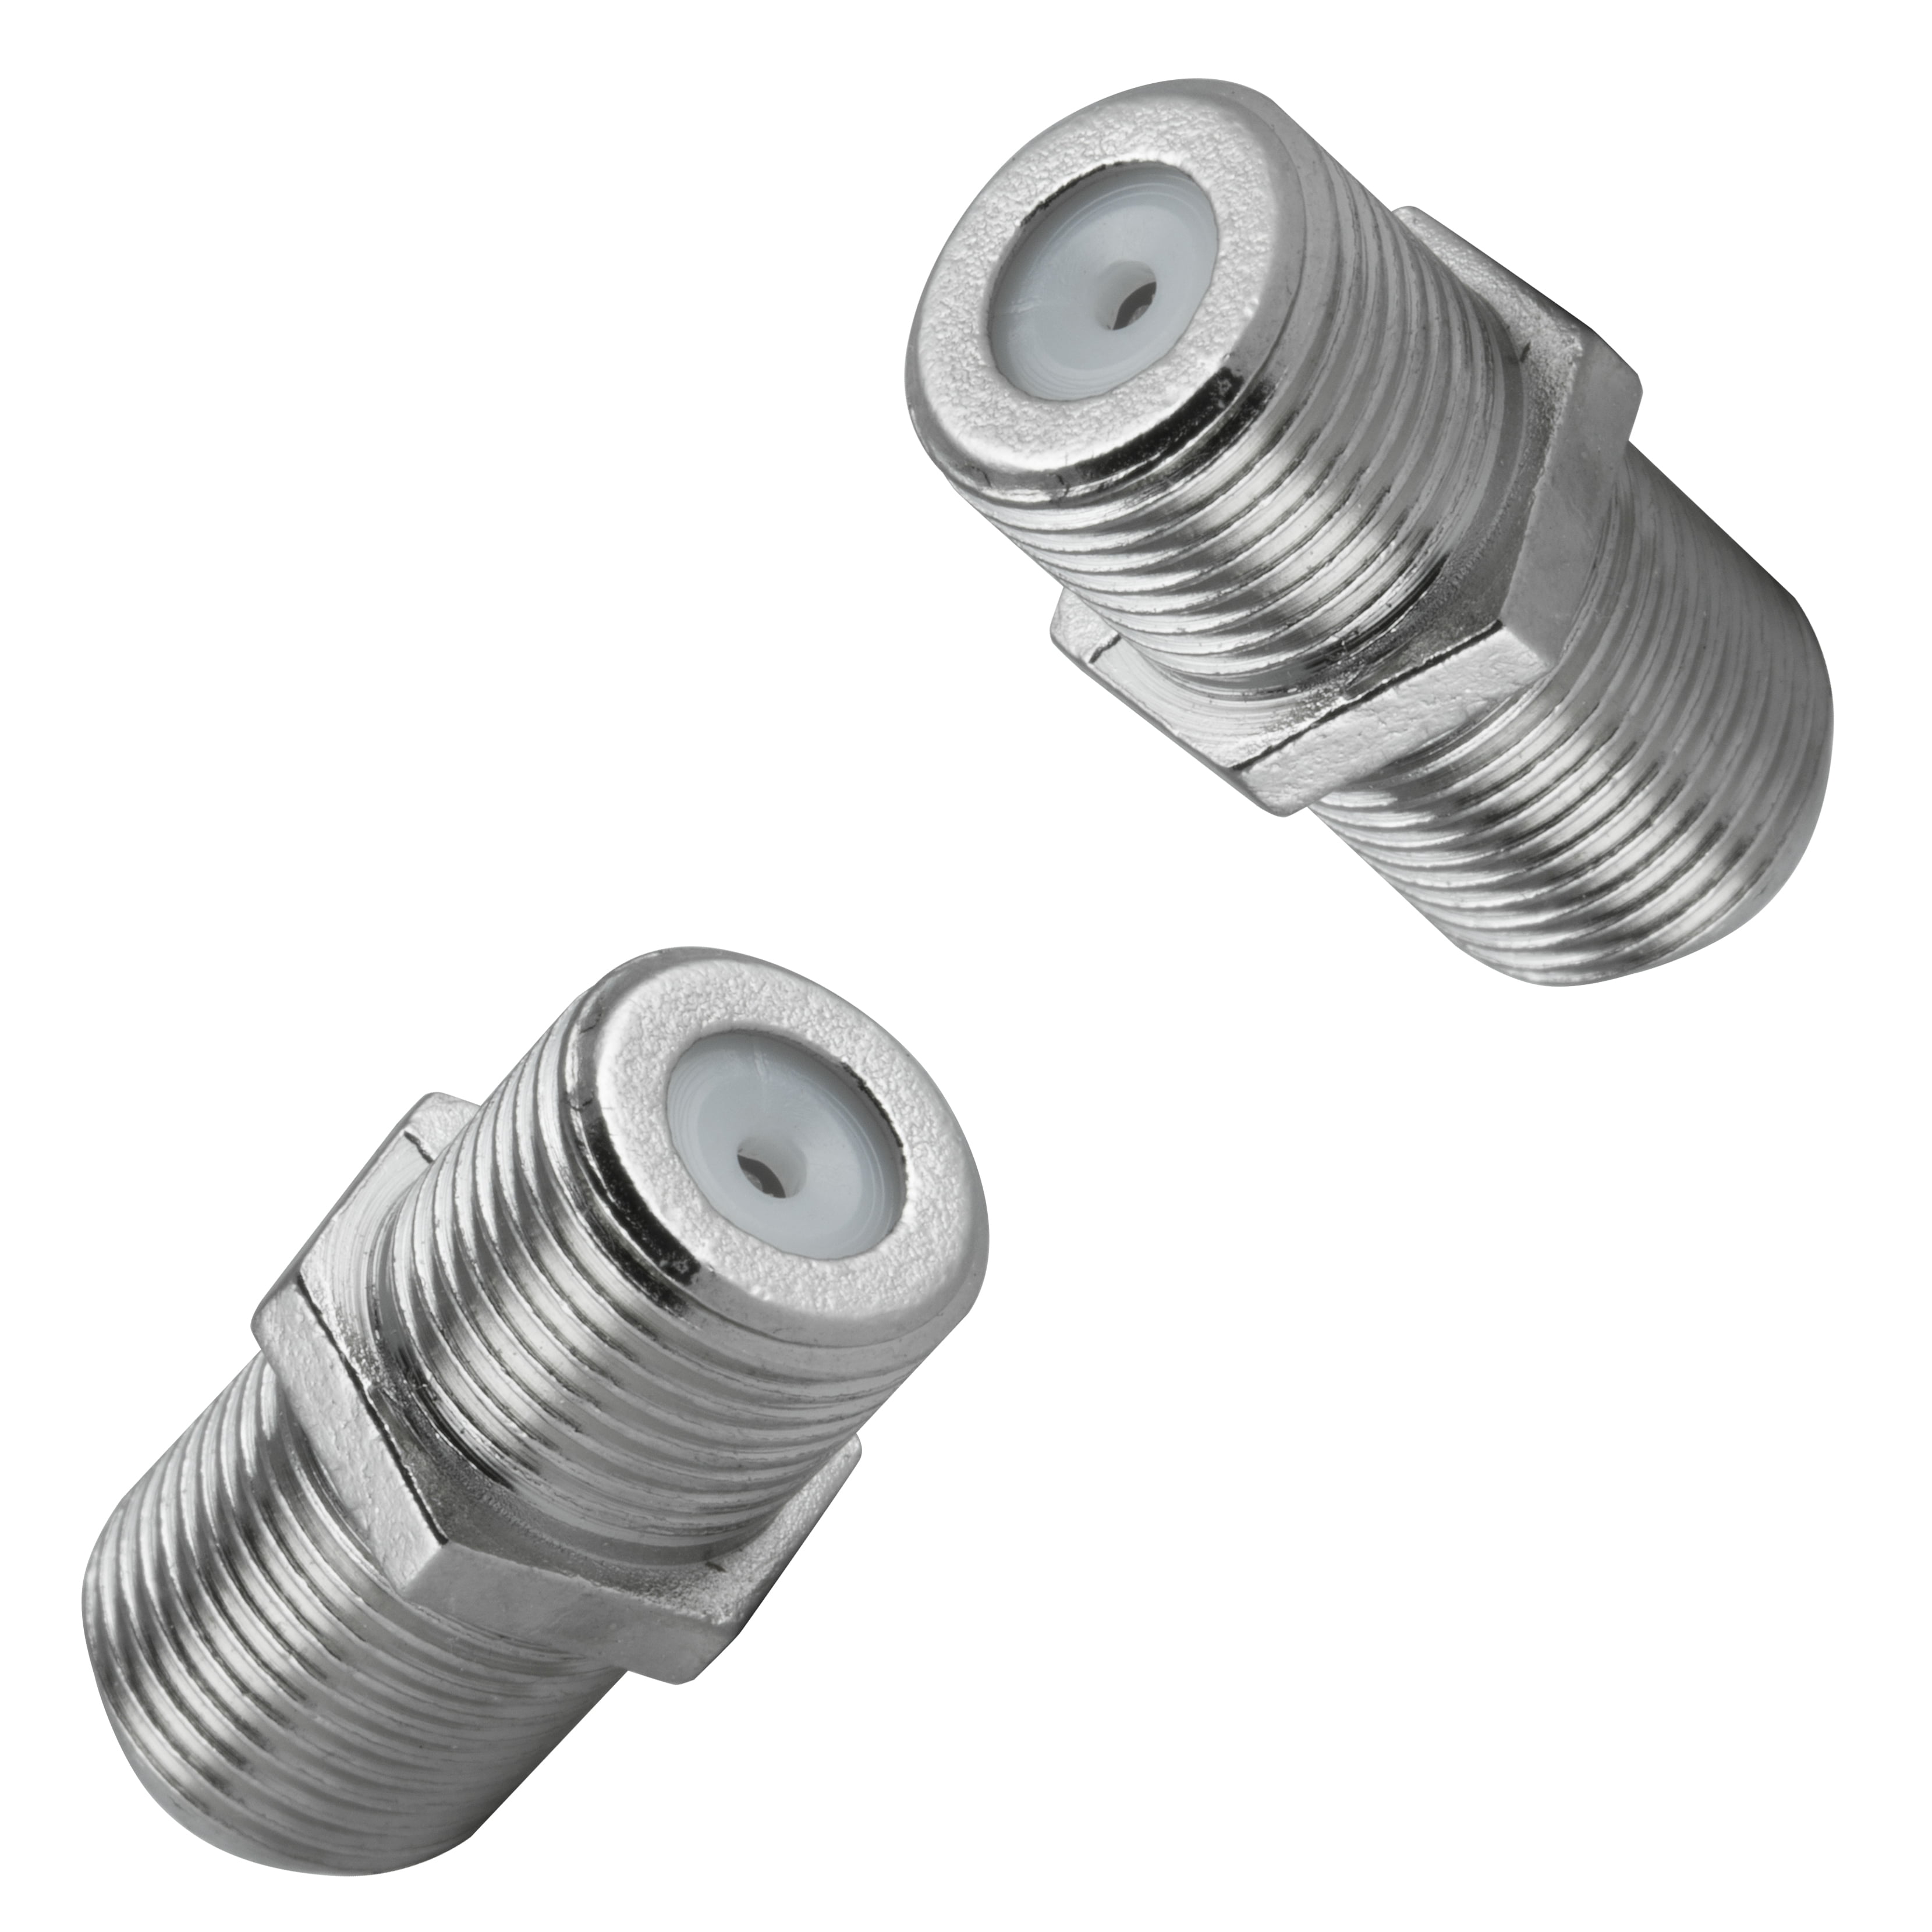 onn. Coax Cable Extension Adapters, 2 Pack, Silver